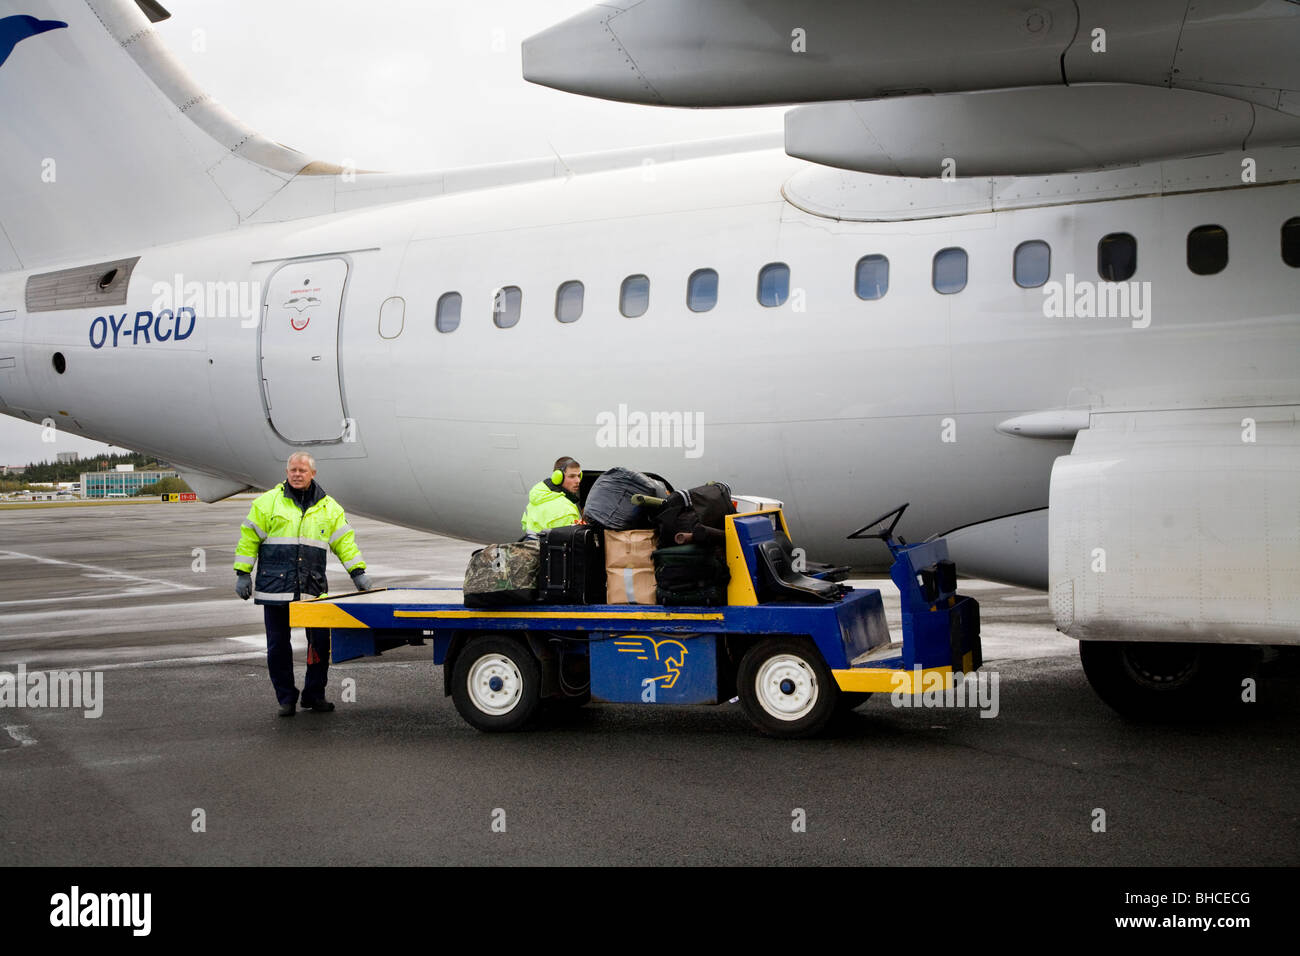 Workers unloading luggage at Reykjavik airport, Iceland. Stock Photo